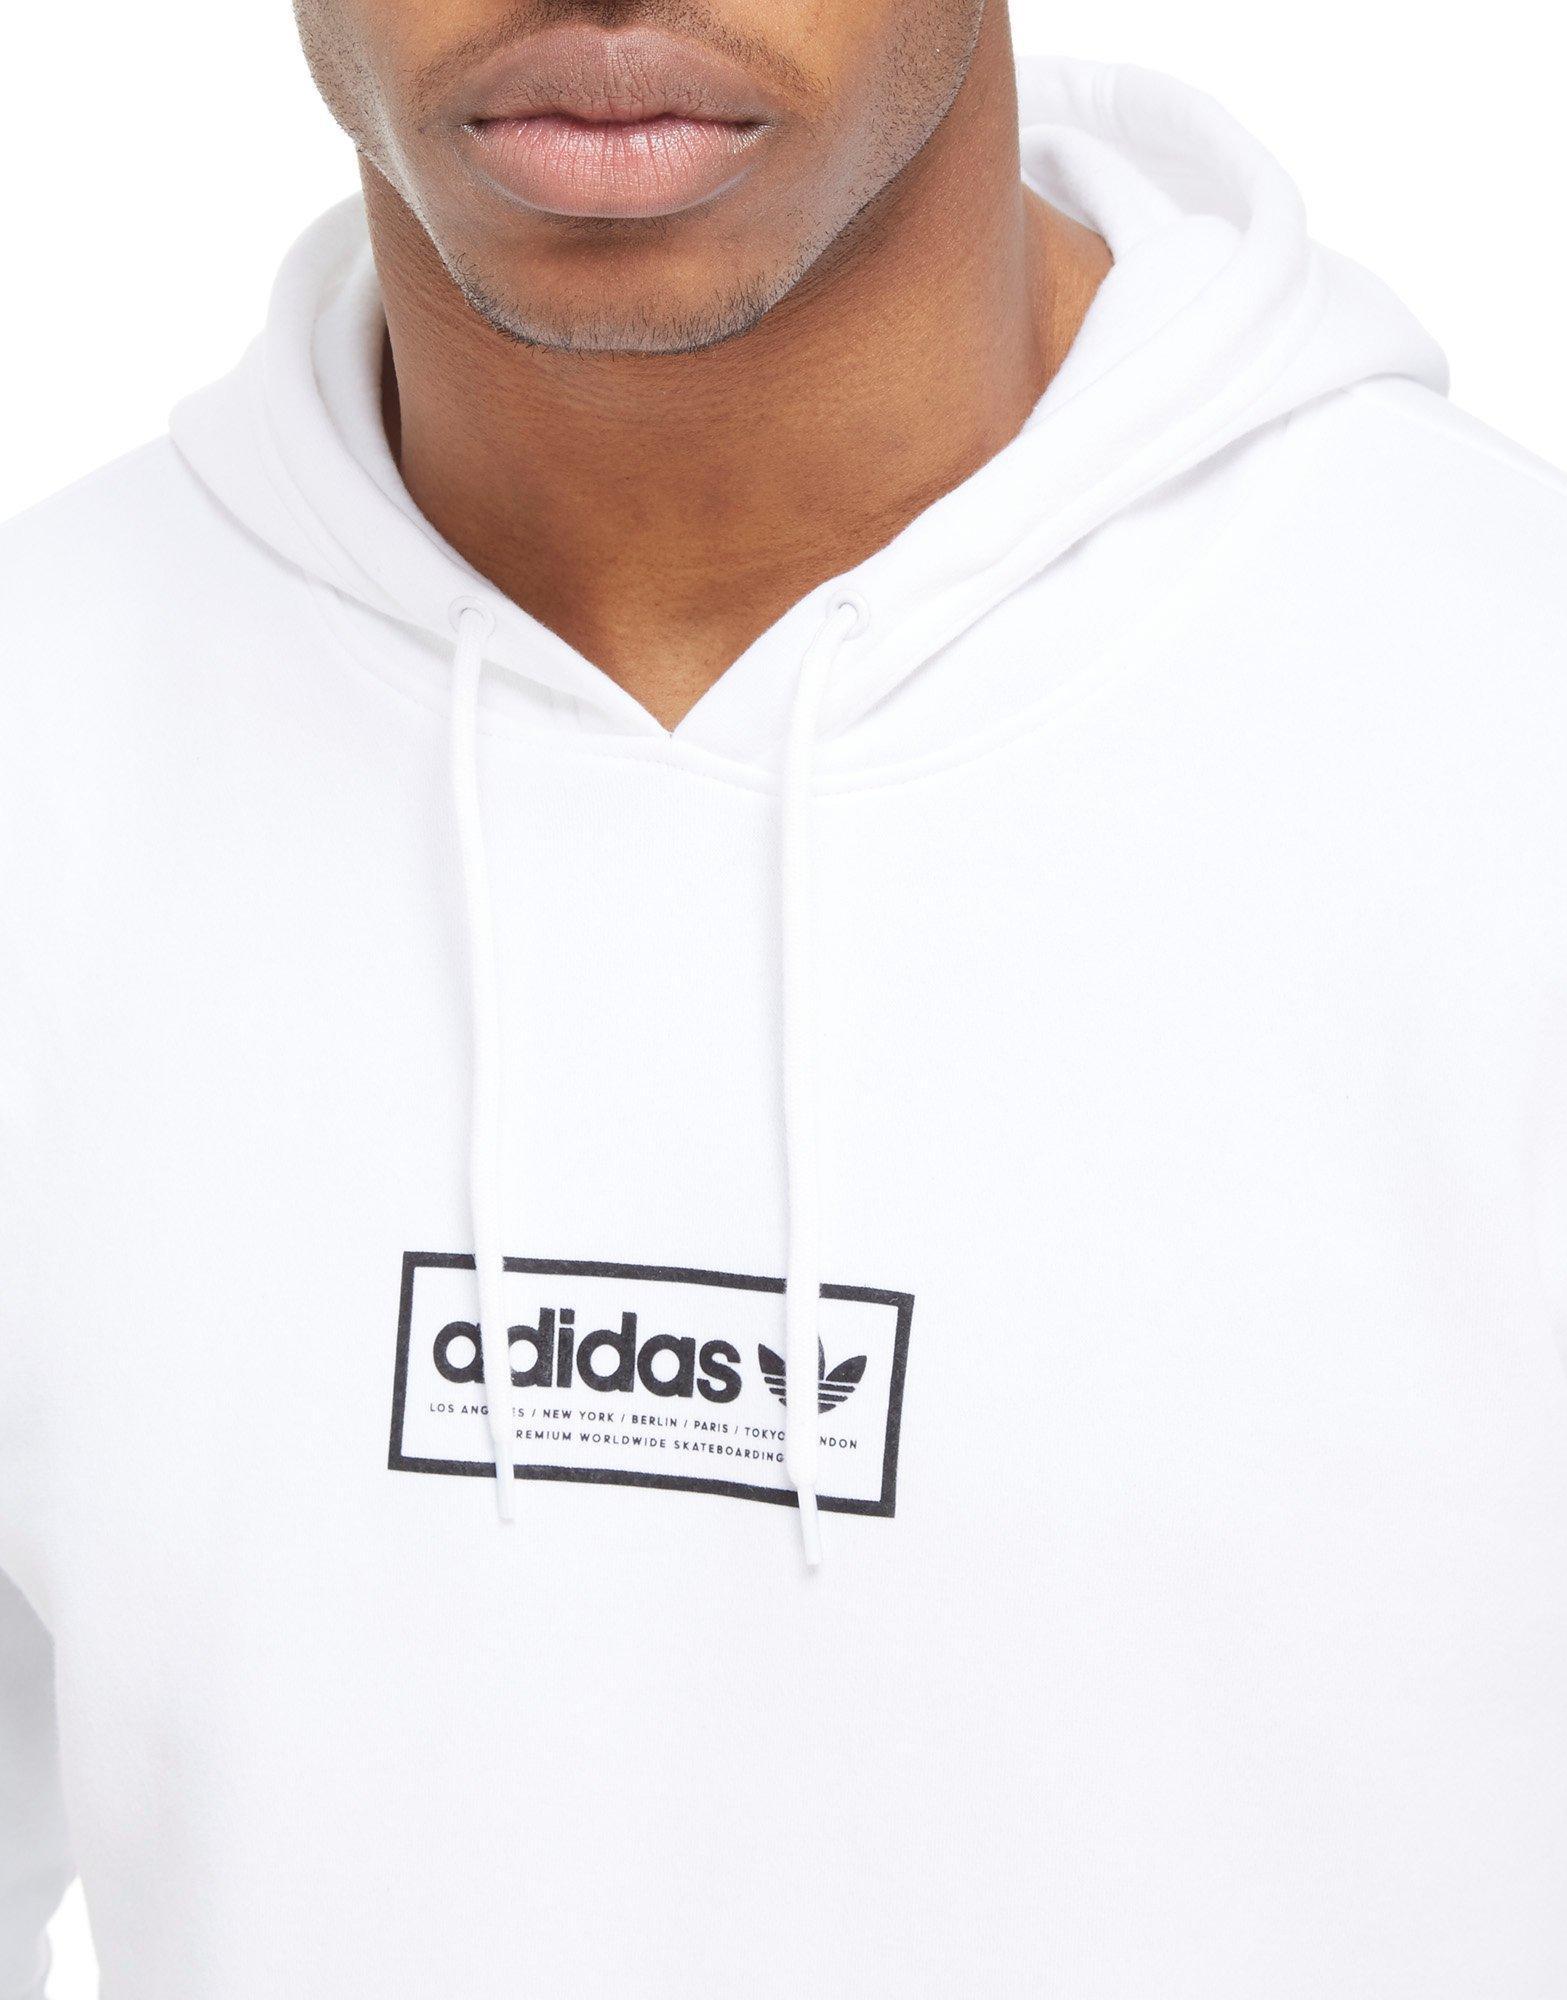 adidas Originals Cotton Skateboarding Spell-out Overhead Hoodie in White  for Men - Lyst